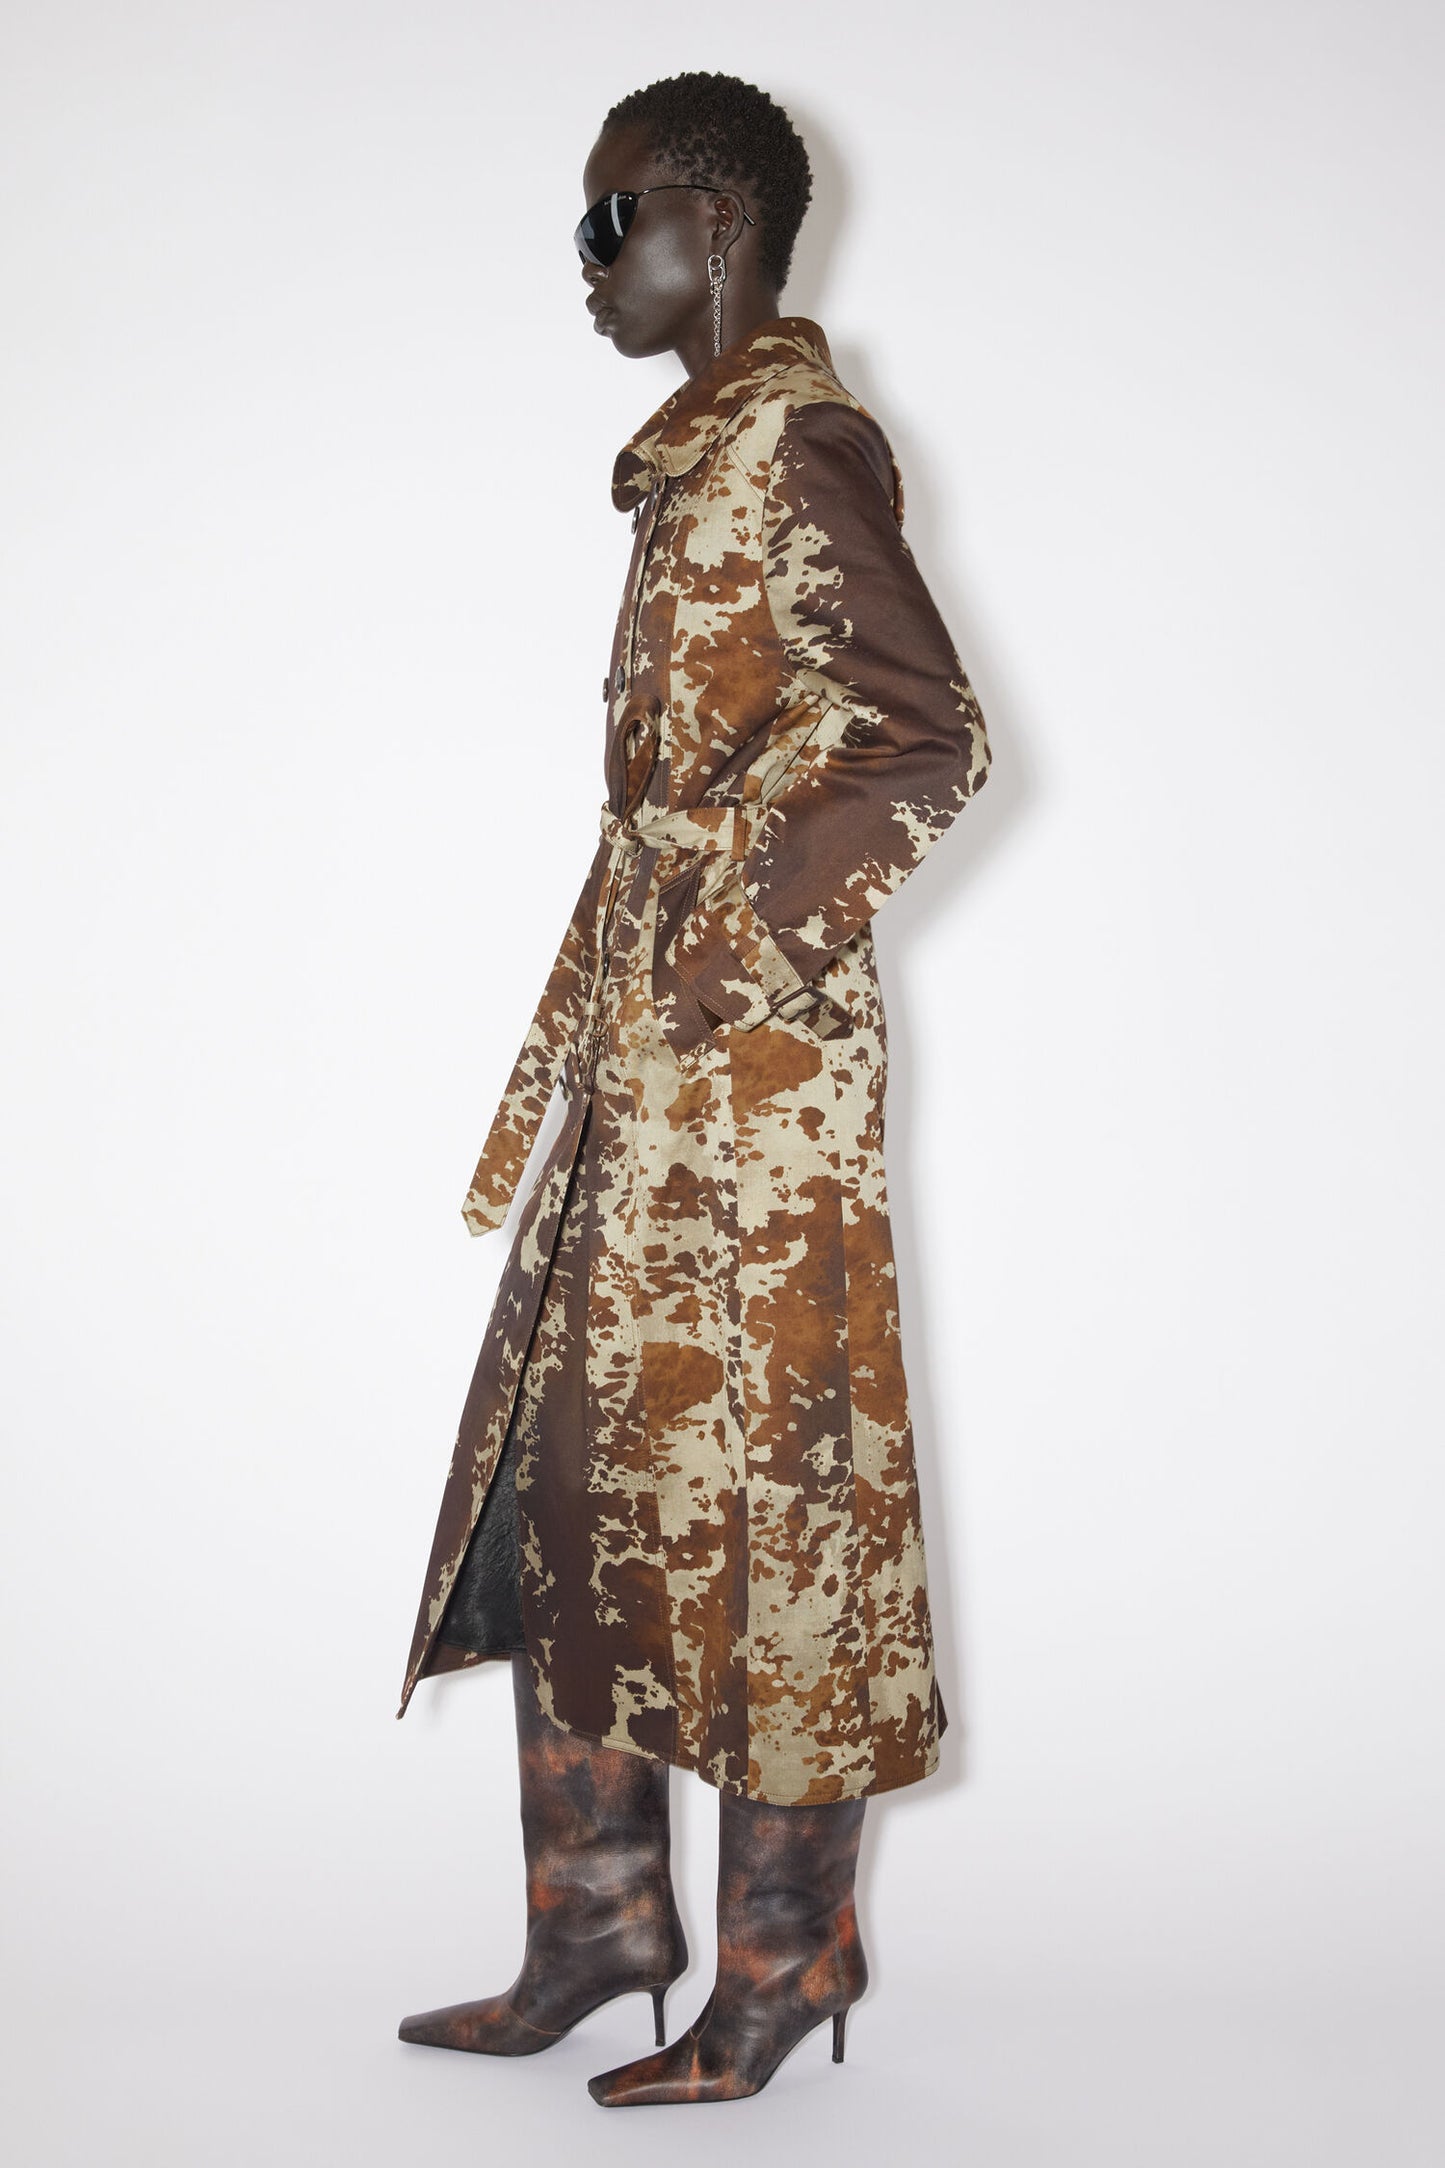 Printed Trench, Dark Brown, Trenchcoat